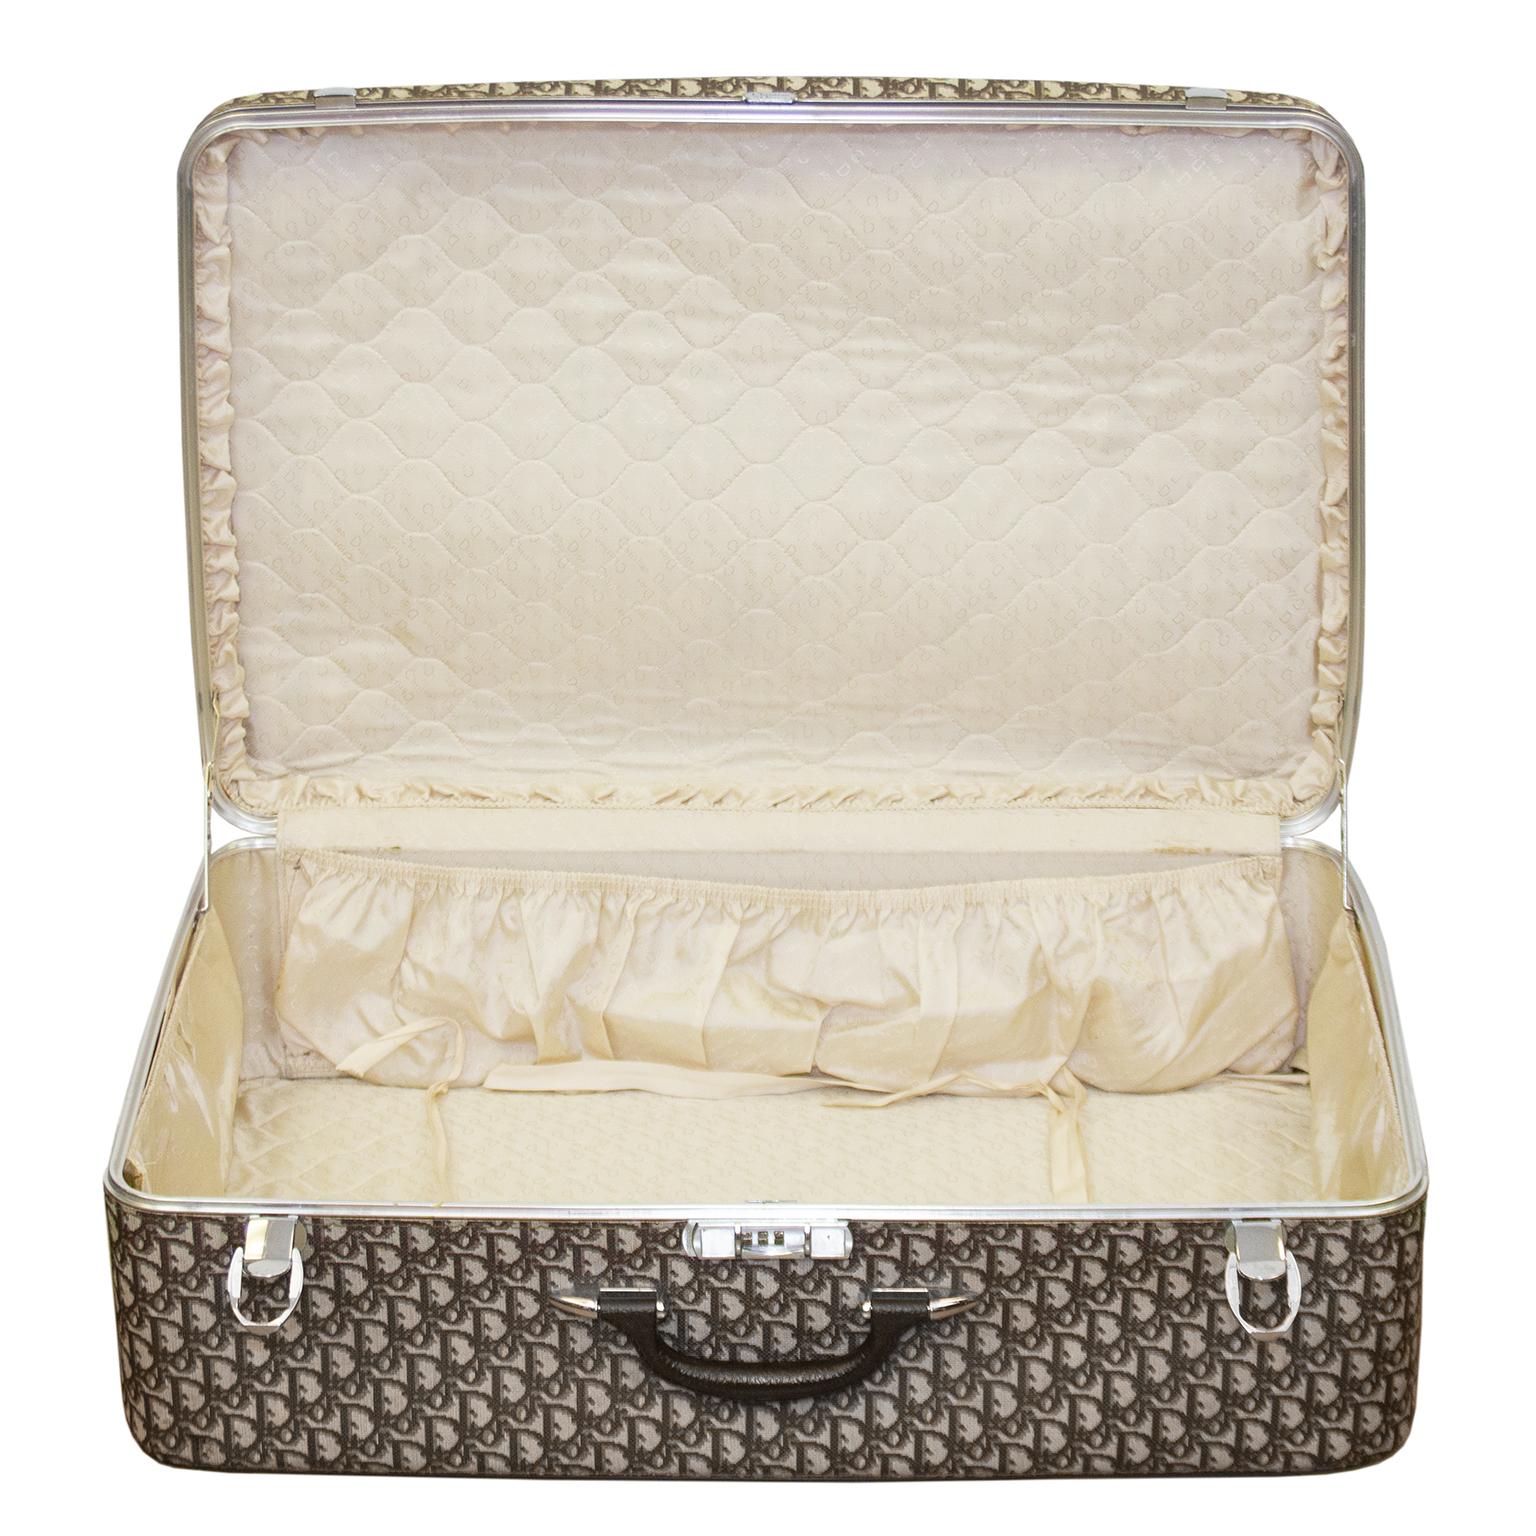 Travel in glamorous style with this Christian Dior hard frame suitcase from the 1960s. From a time when travelling was an occasion worth dressing for, this large suitcase is a durable textured logo vinyl with an all over brown and tan Dior monogram